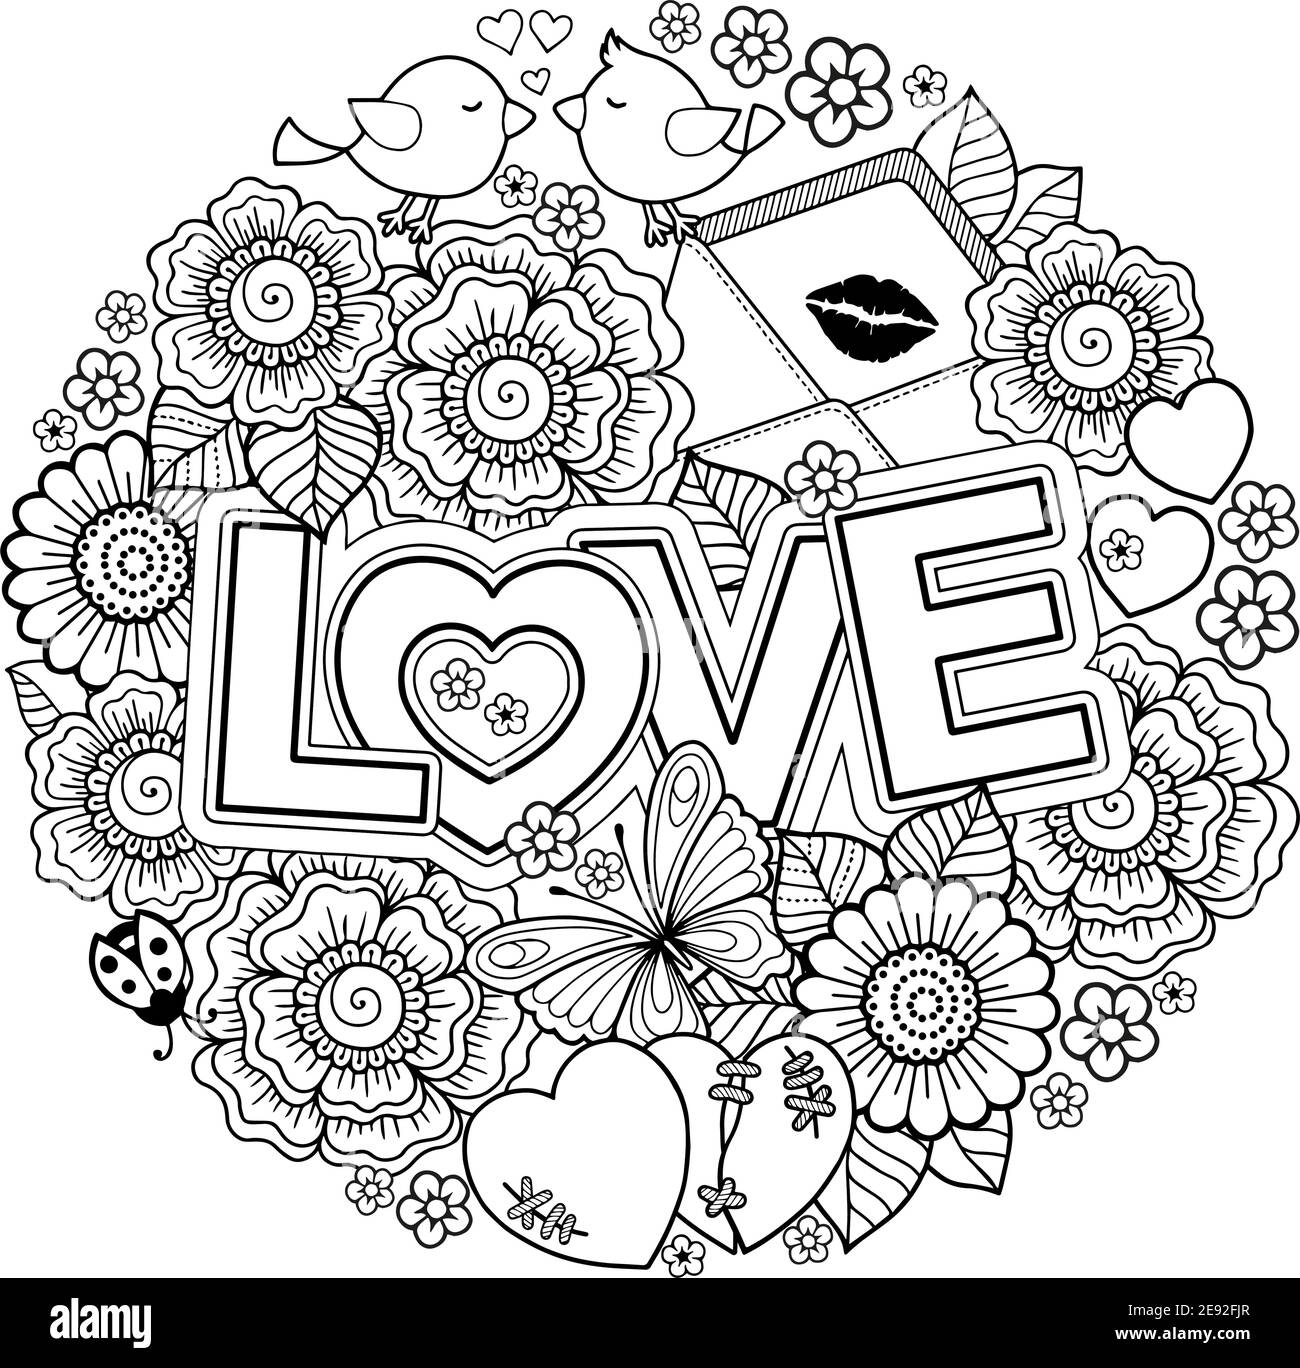 Vector coloring book for adult design for wedding invitations and valentines day of abstract flowers hearts envelope arrow heart bird kiss bu stock vector image art